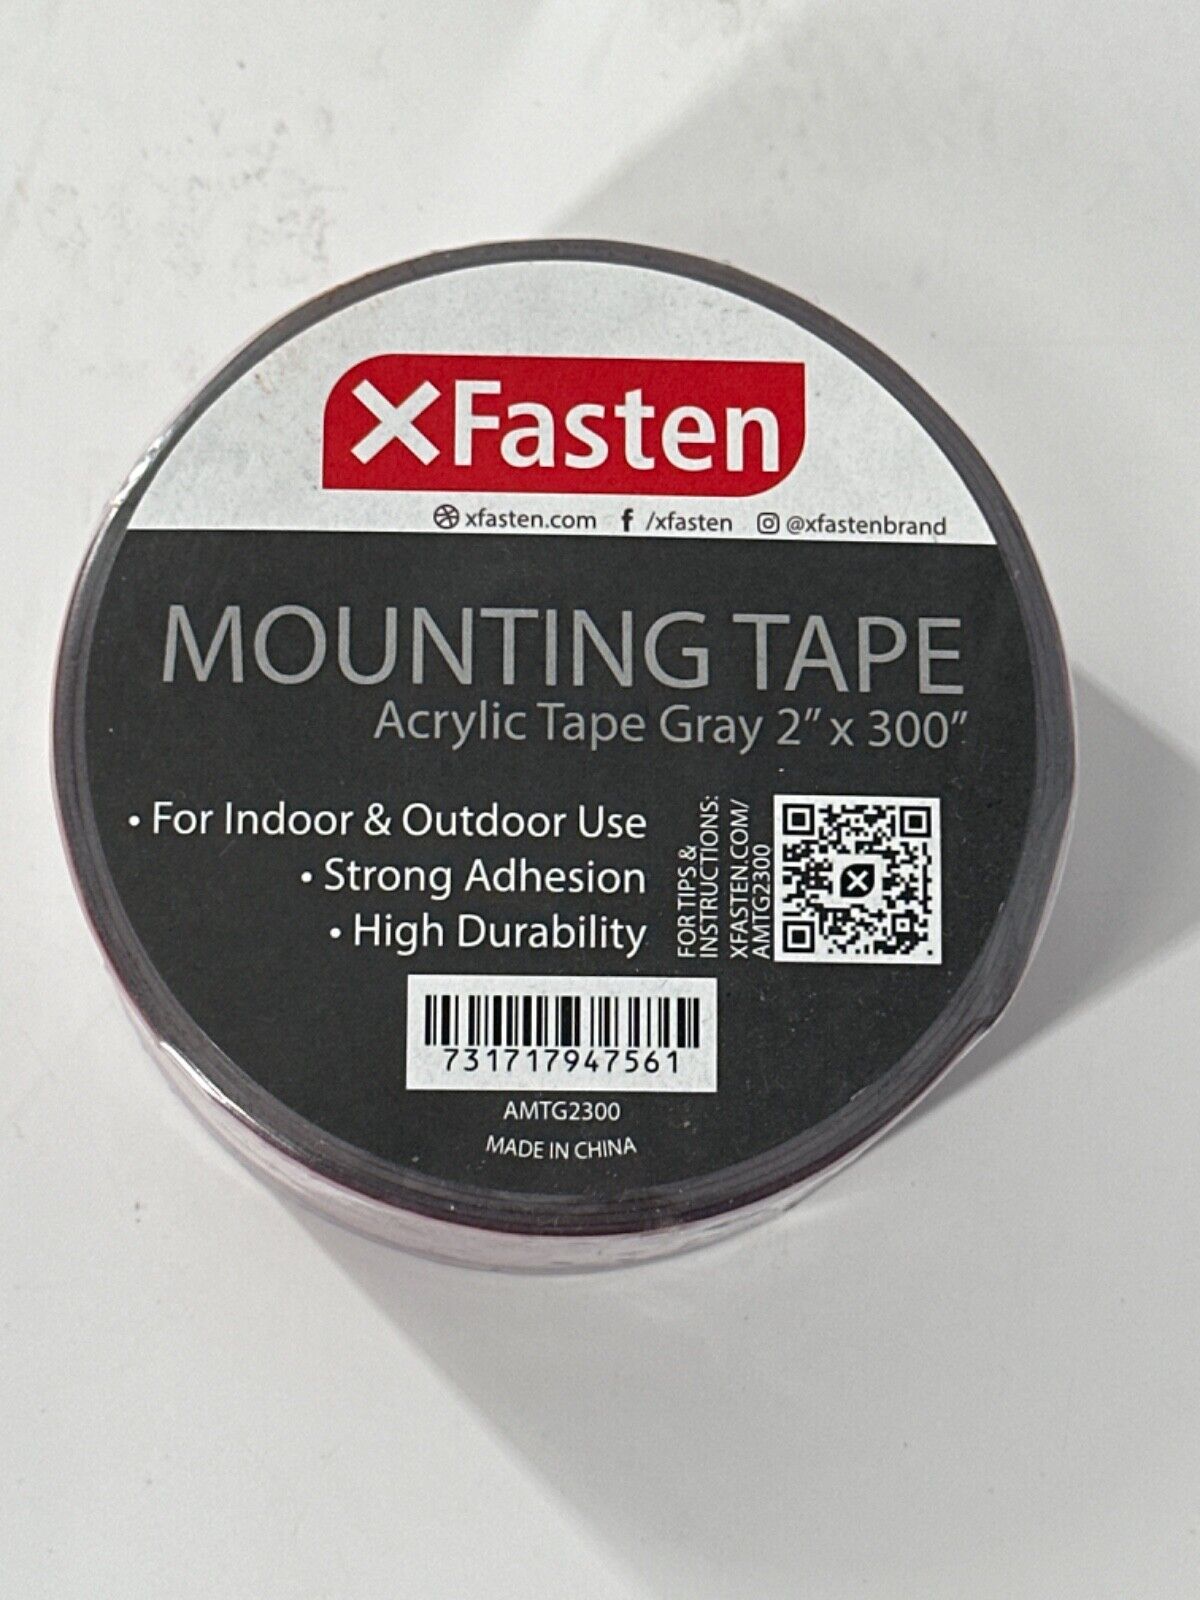 XFasten Extreme Double-Sided Acrylic Mounting Tape Removable (Gray, 2" x 300") - Opticdeals